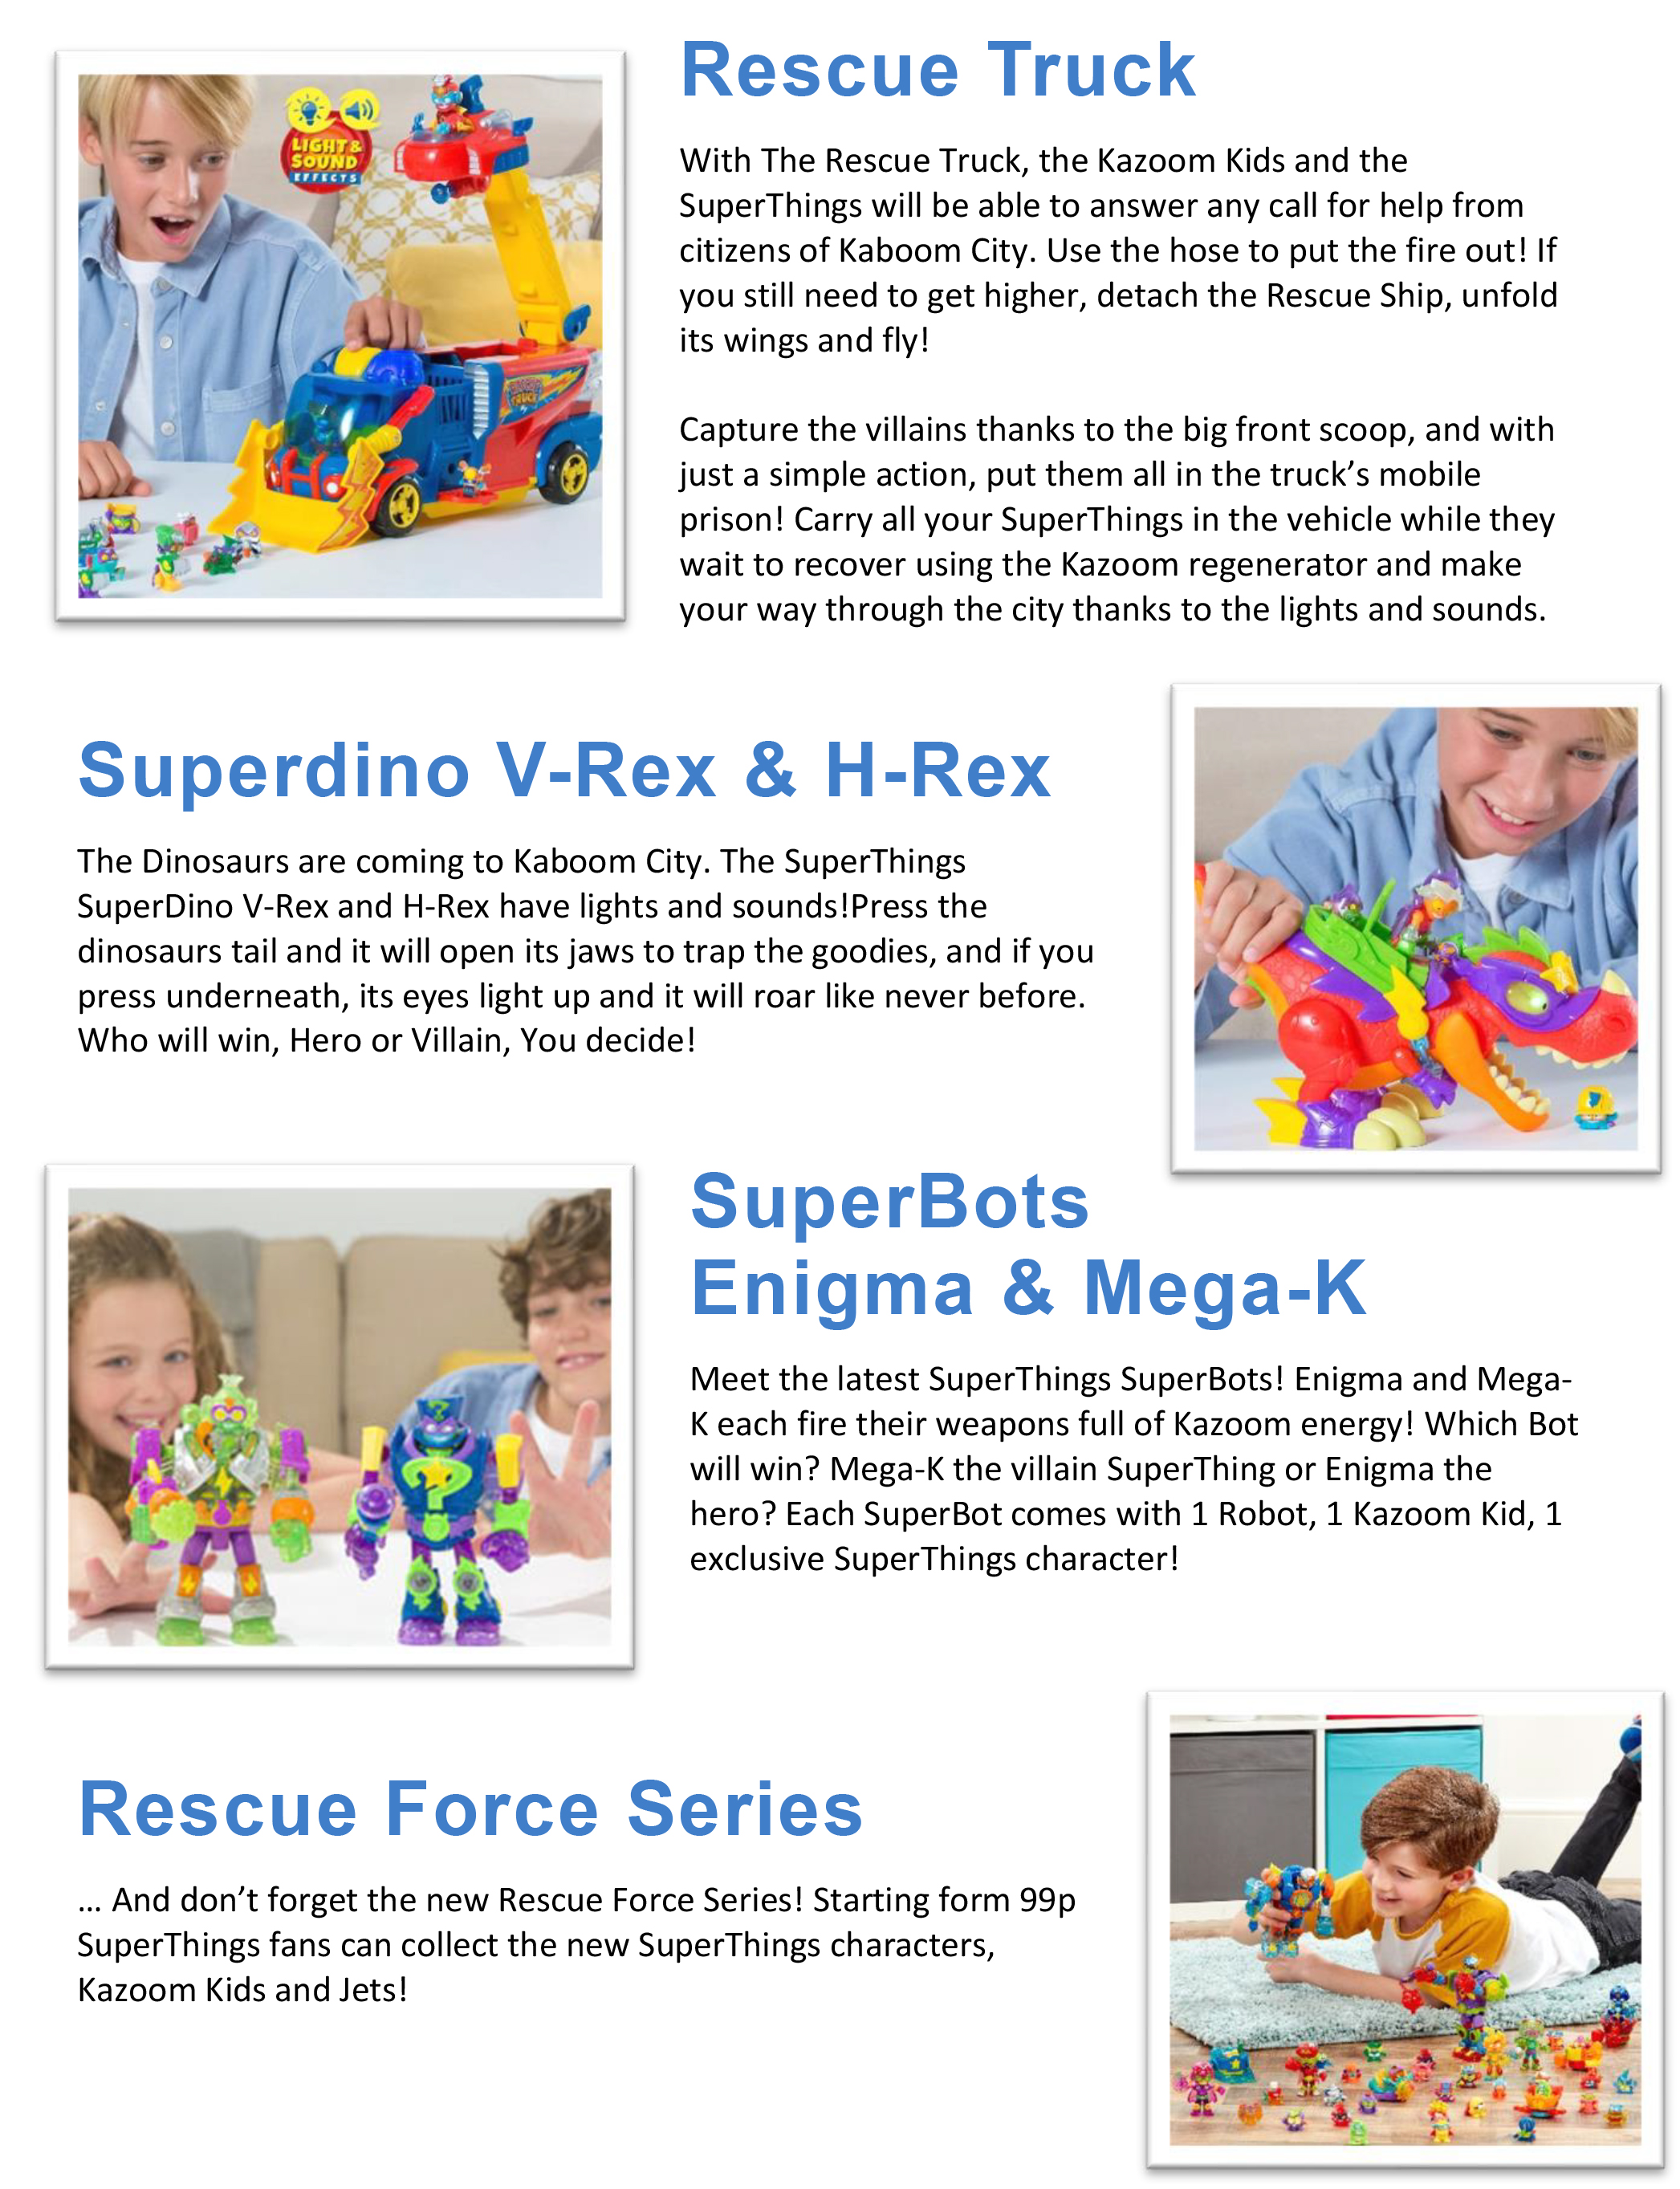 WIN the SuperThings Rescue Truck and other SuperThings prizes!